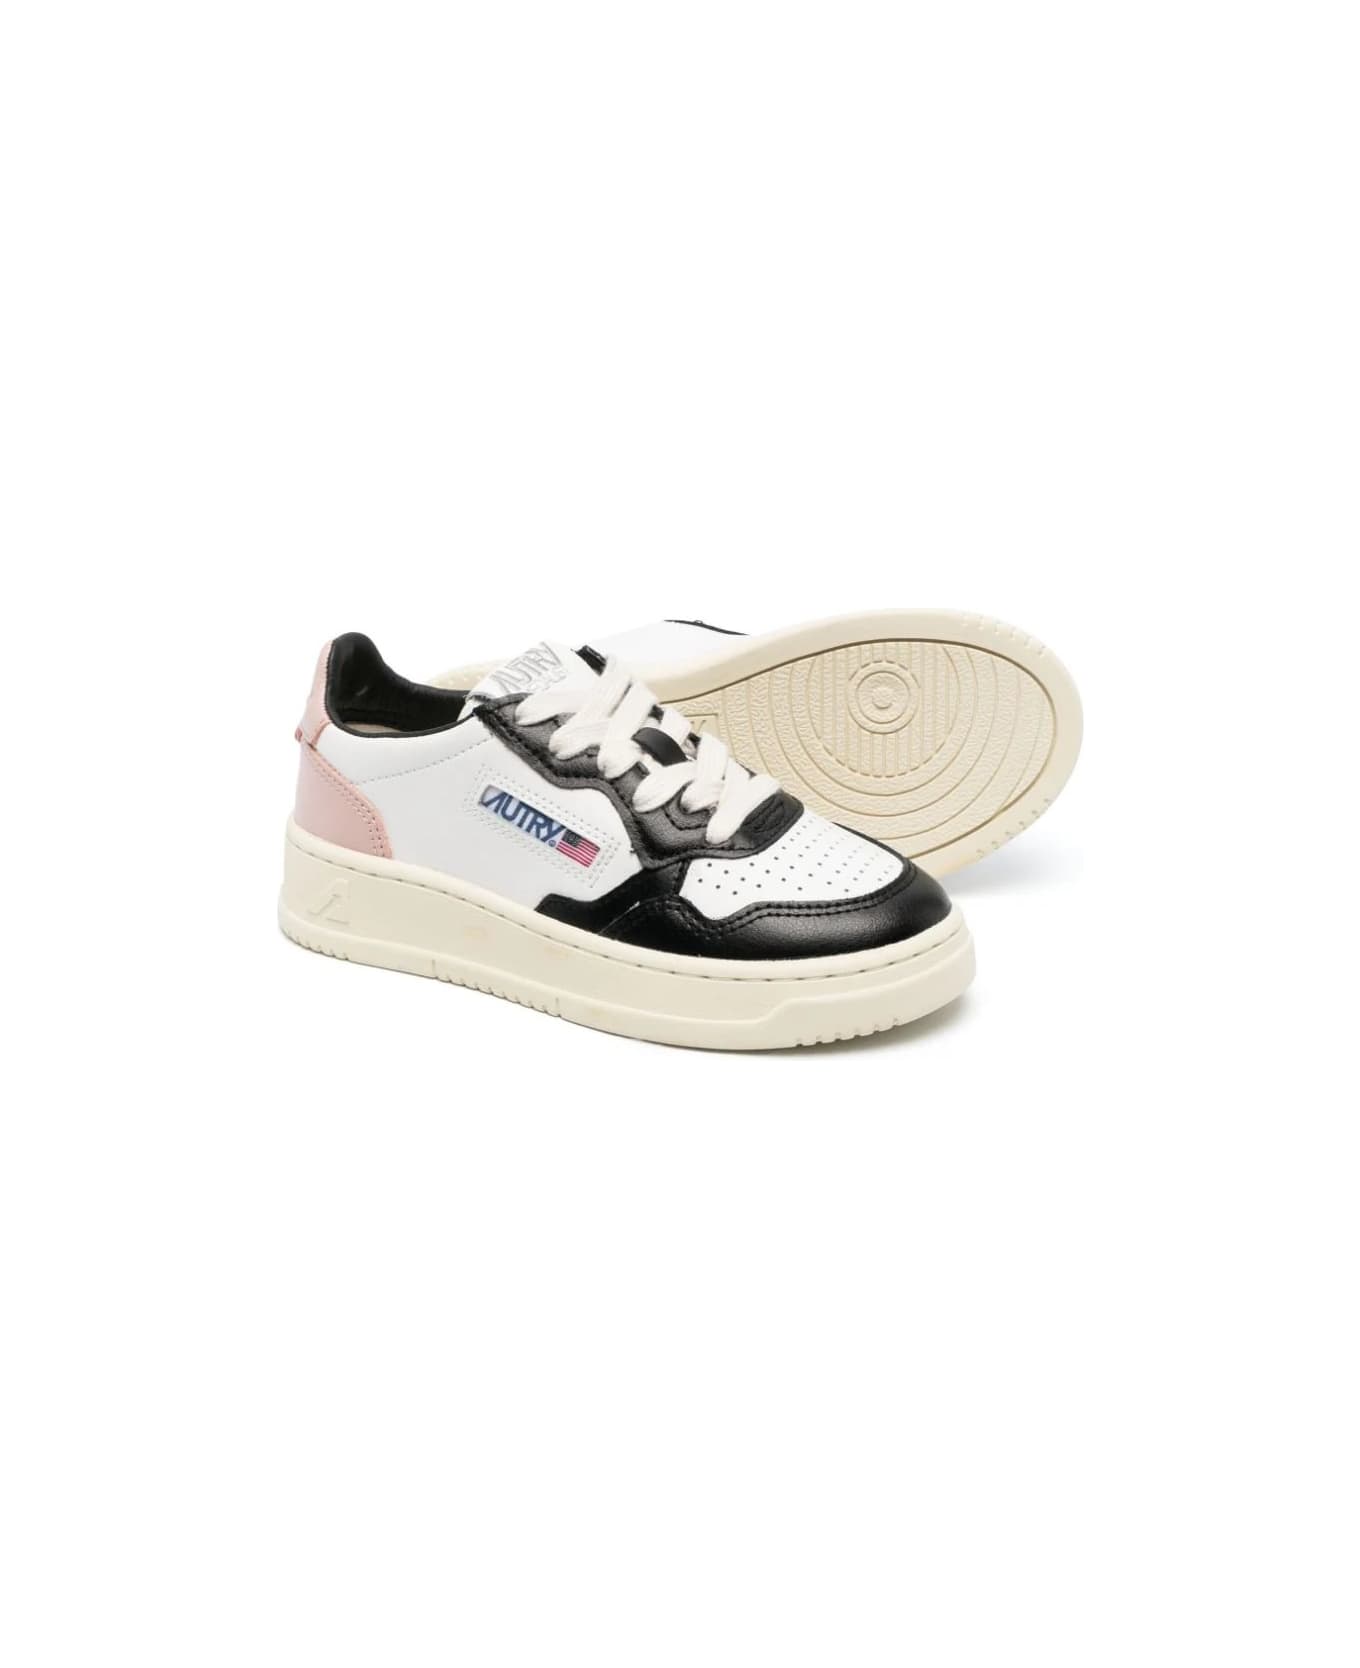 Autry White, Pink And Black Medalist Low Sneakers - Bianco